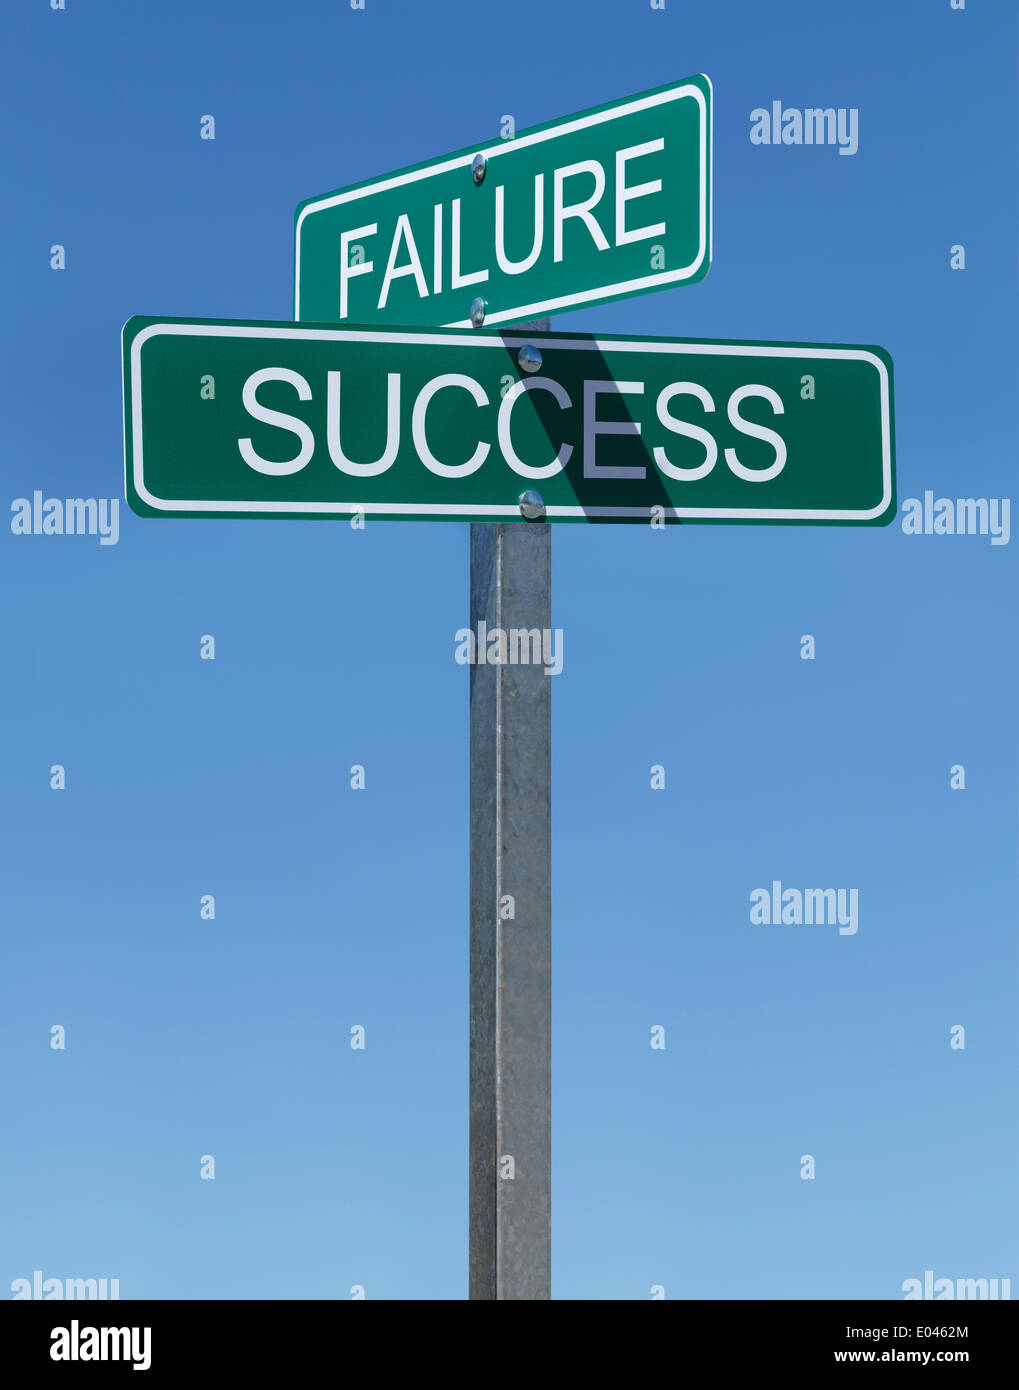 Two Green Street Signs Failure and Success on Metal Pole with Blue Sky Background. Stock Photo